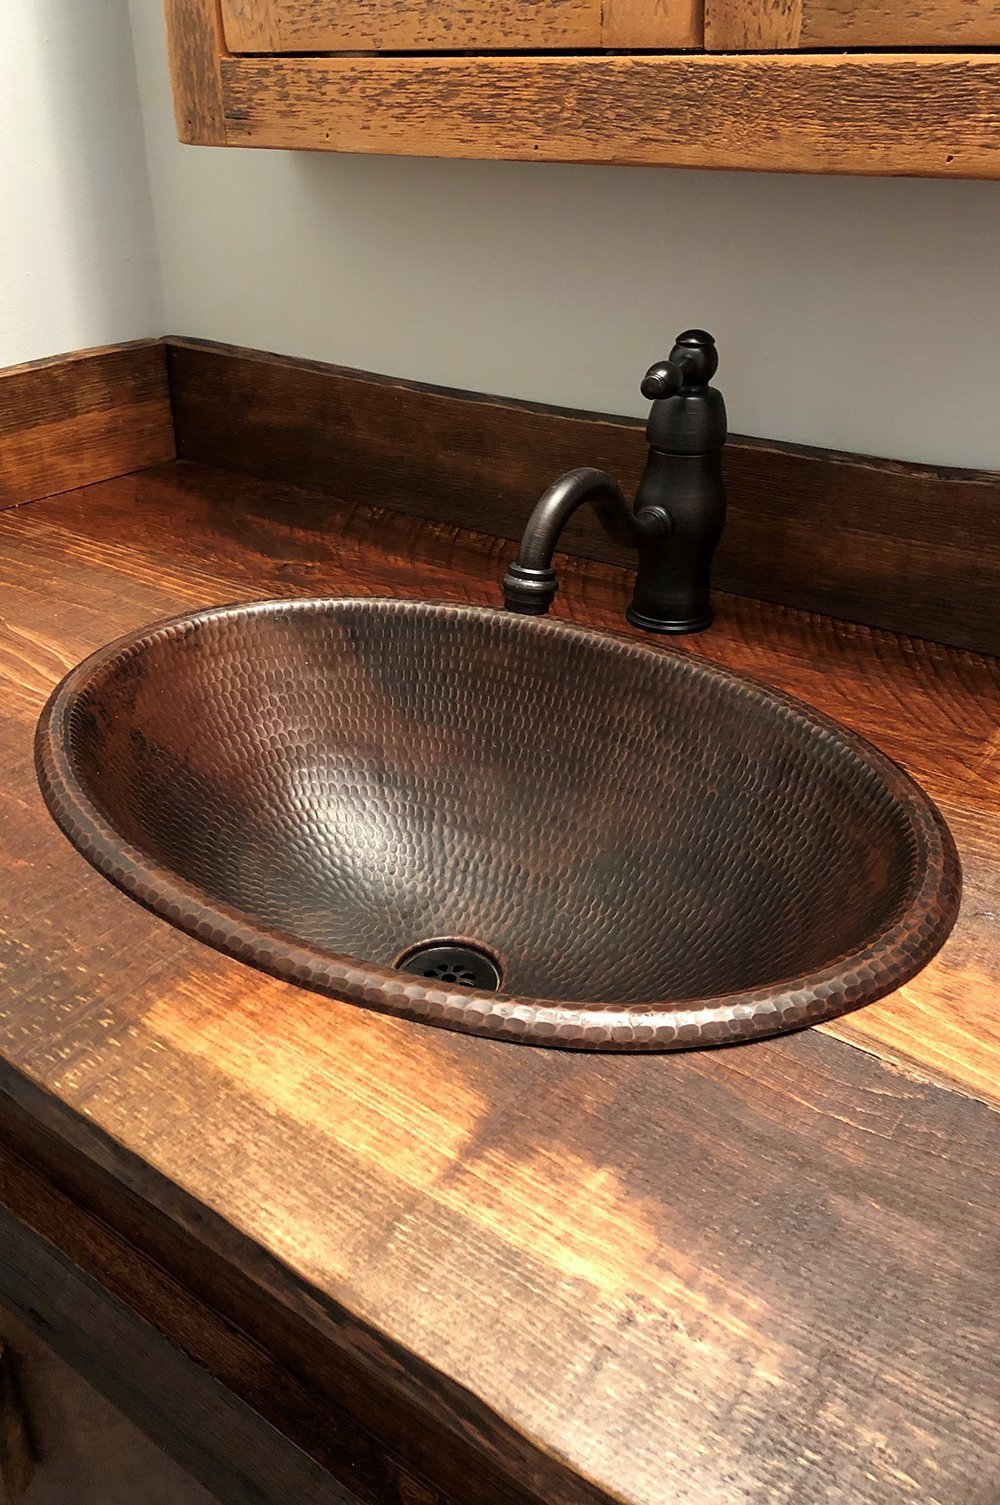 Premier Copper Sink Drain in Oil Rubbed Bronze in copper sink with rustic wood counter